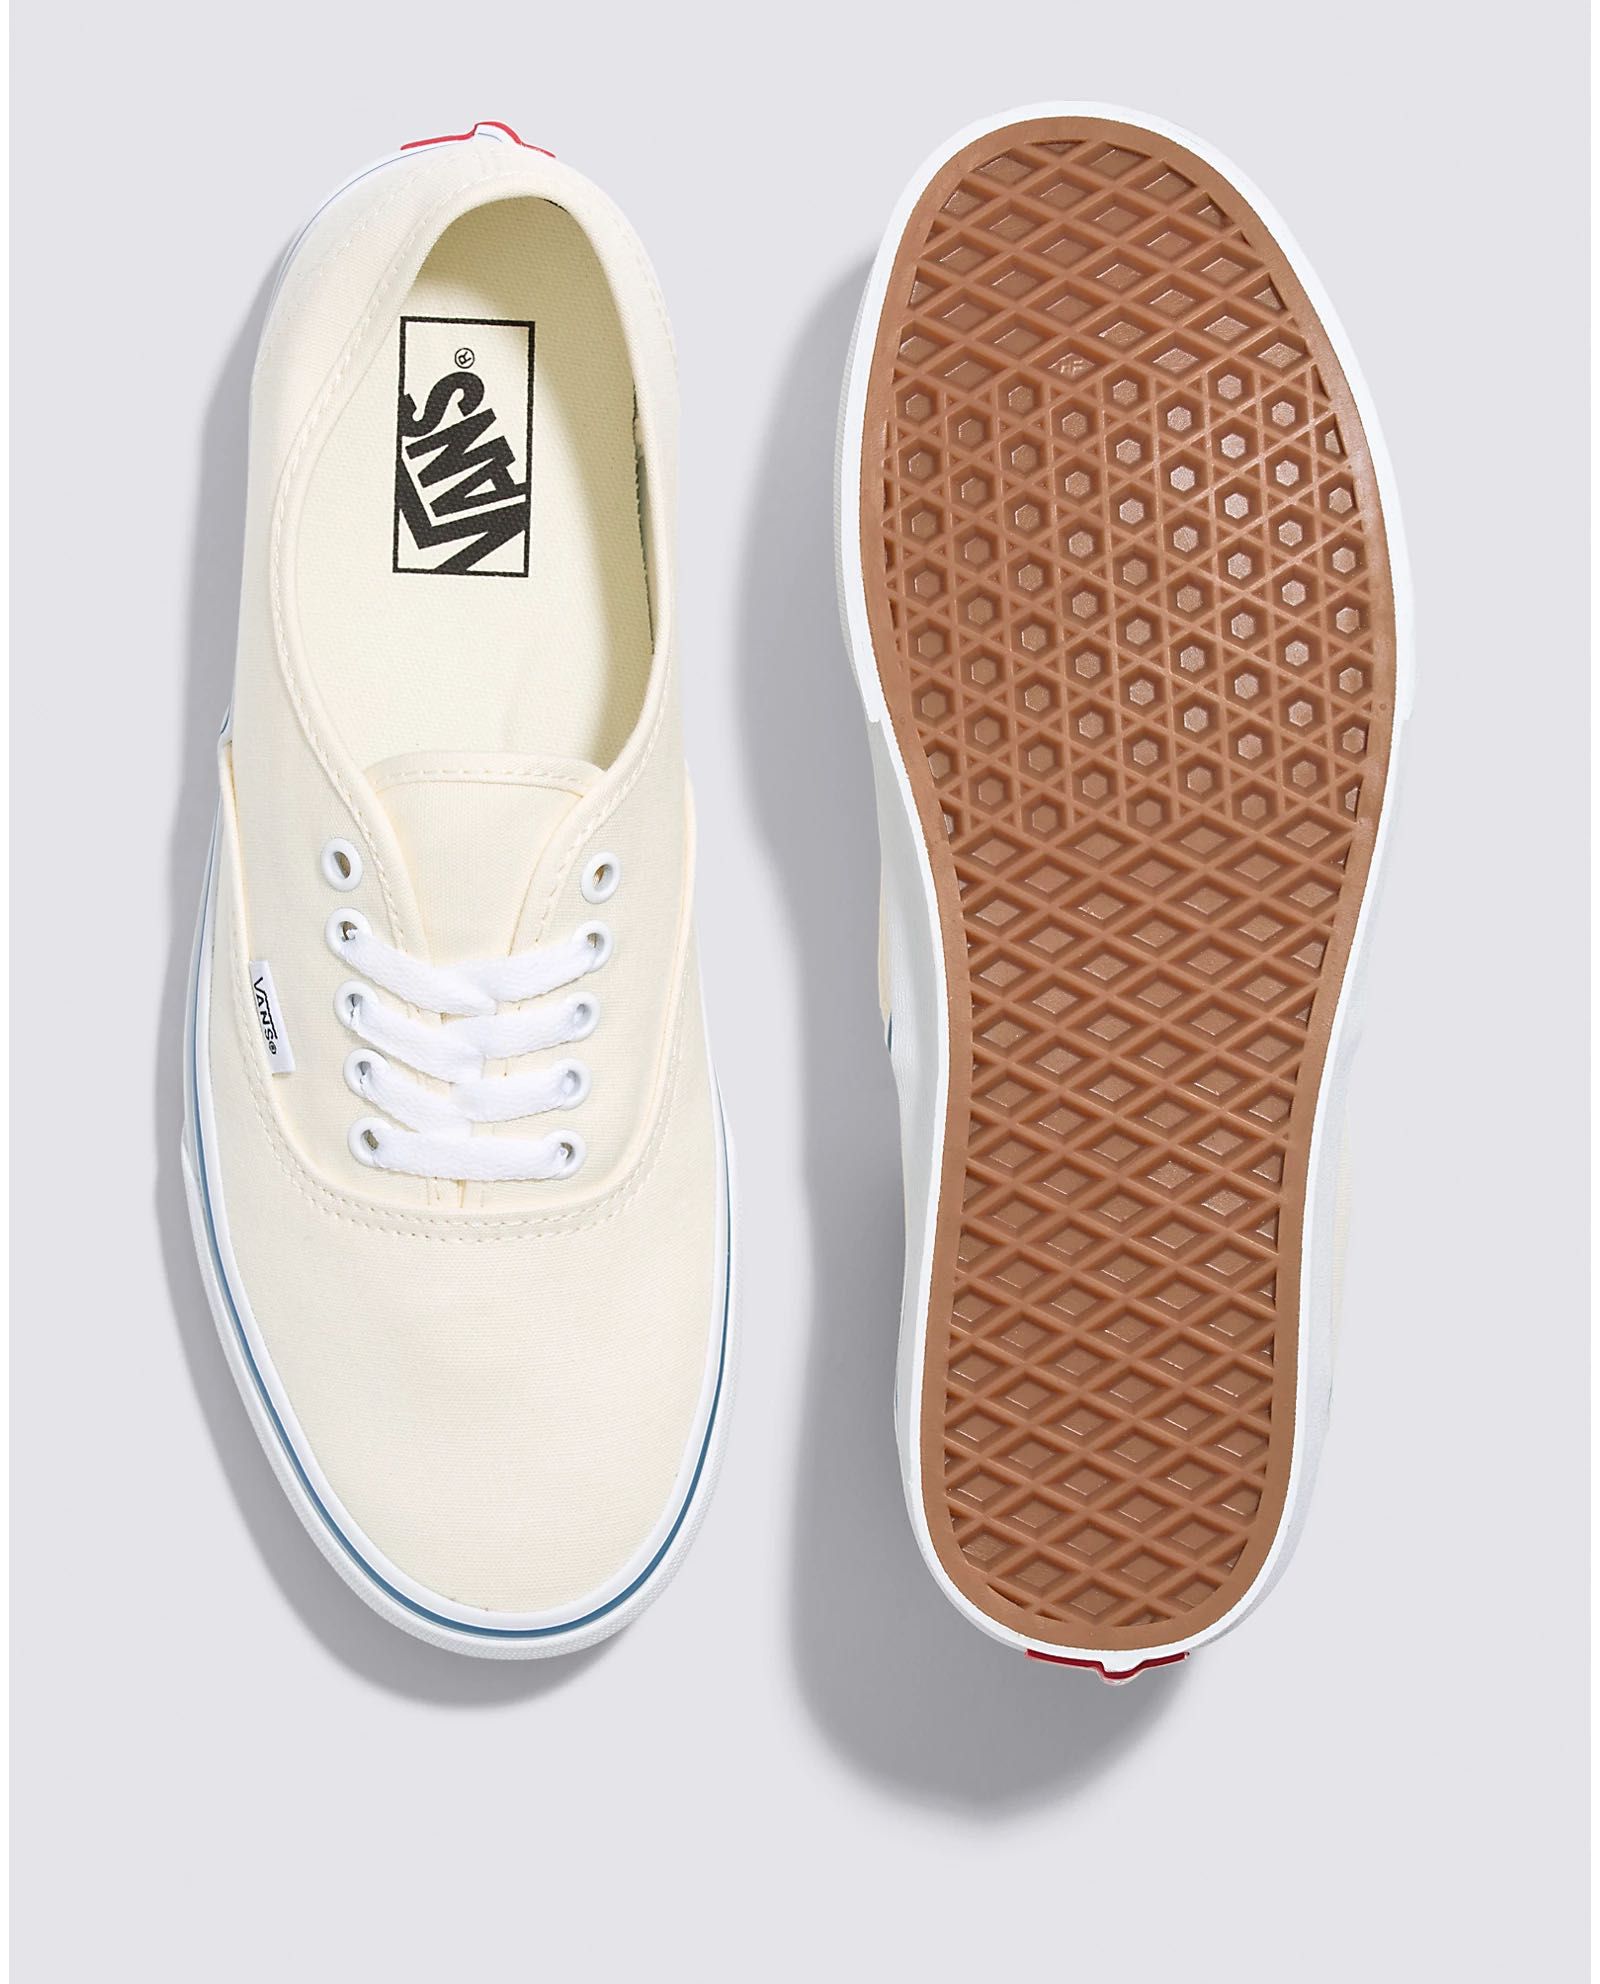 Vans Authentic White (light yellow, from USA)